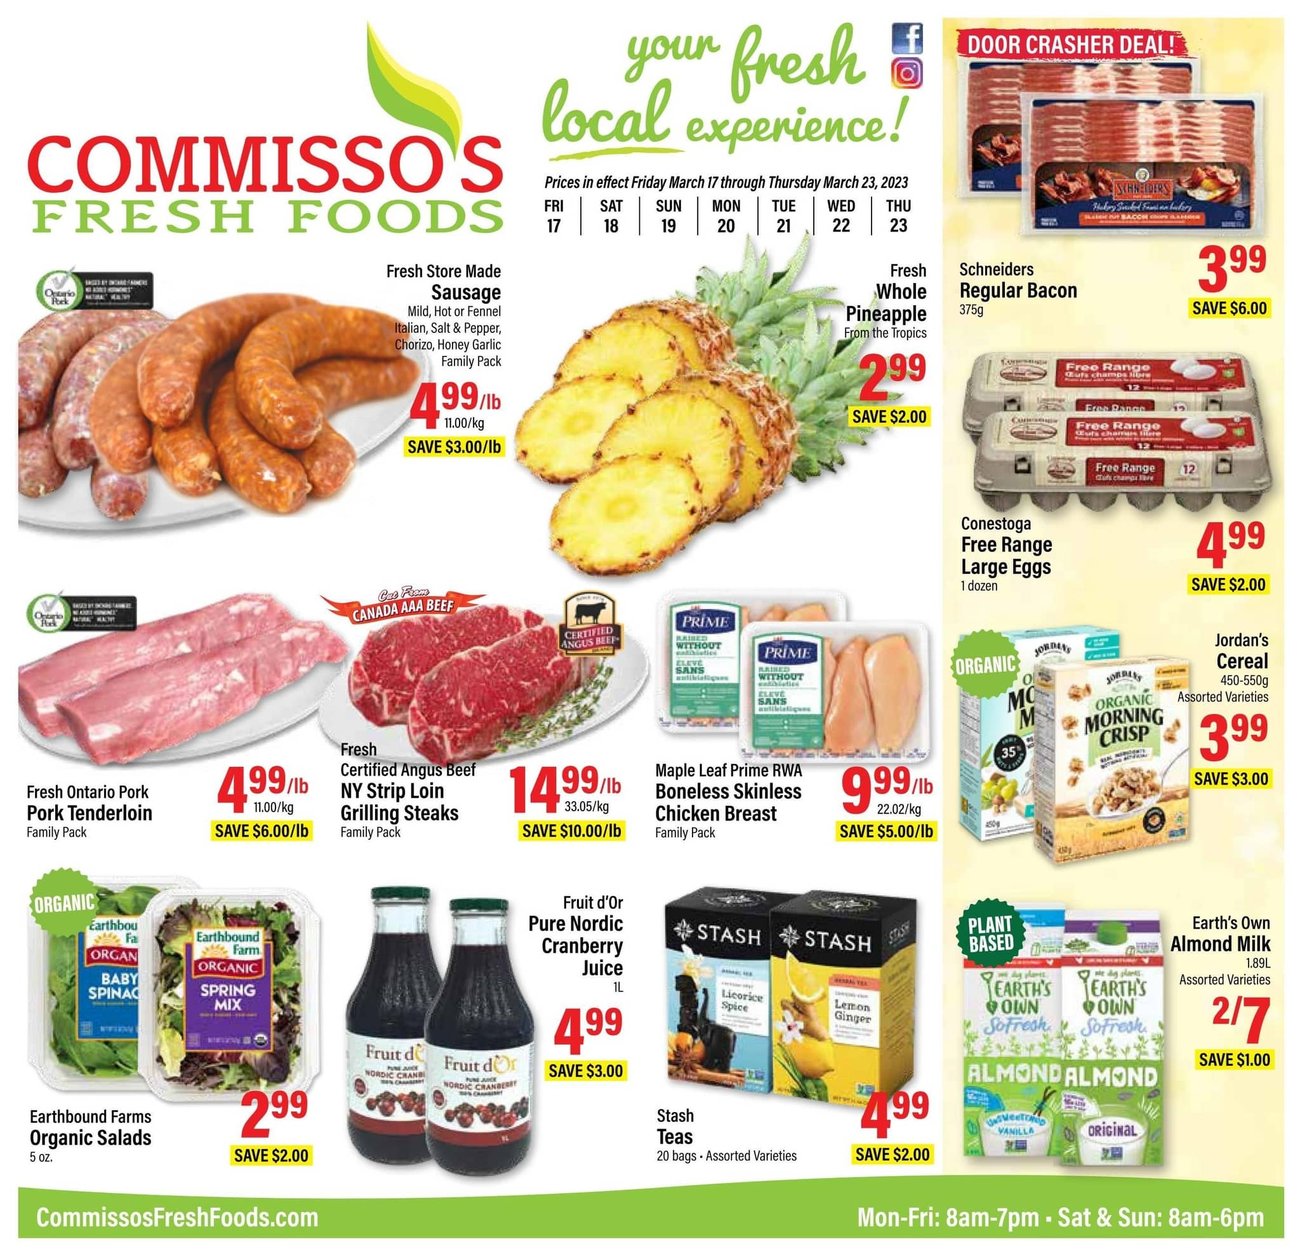 Commisso's Fresh Foods - Weekly Flyer Specials - Page 1